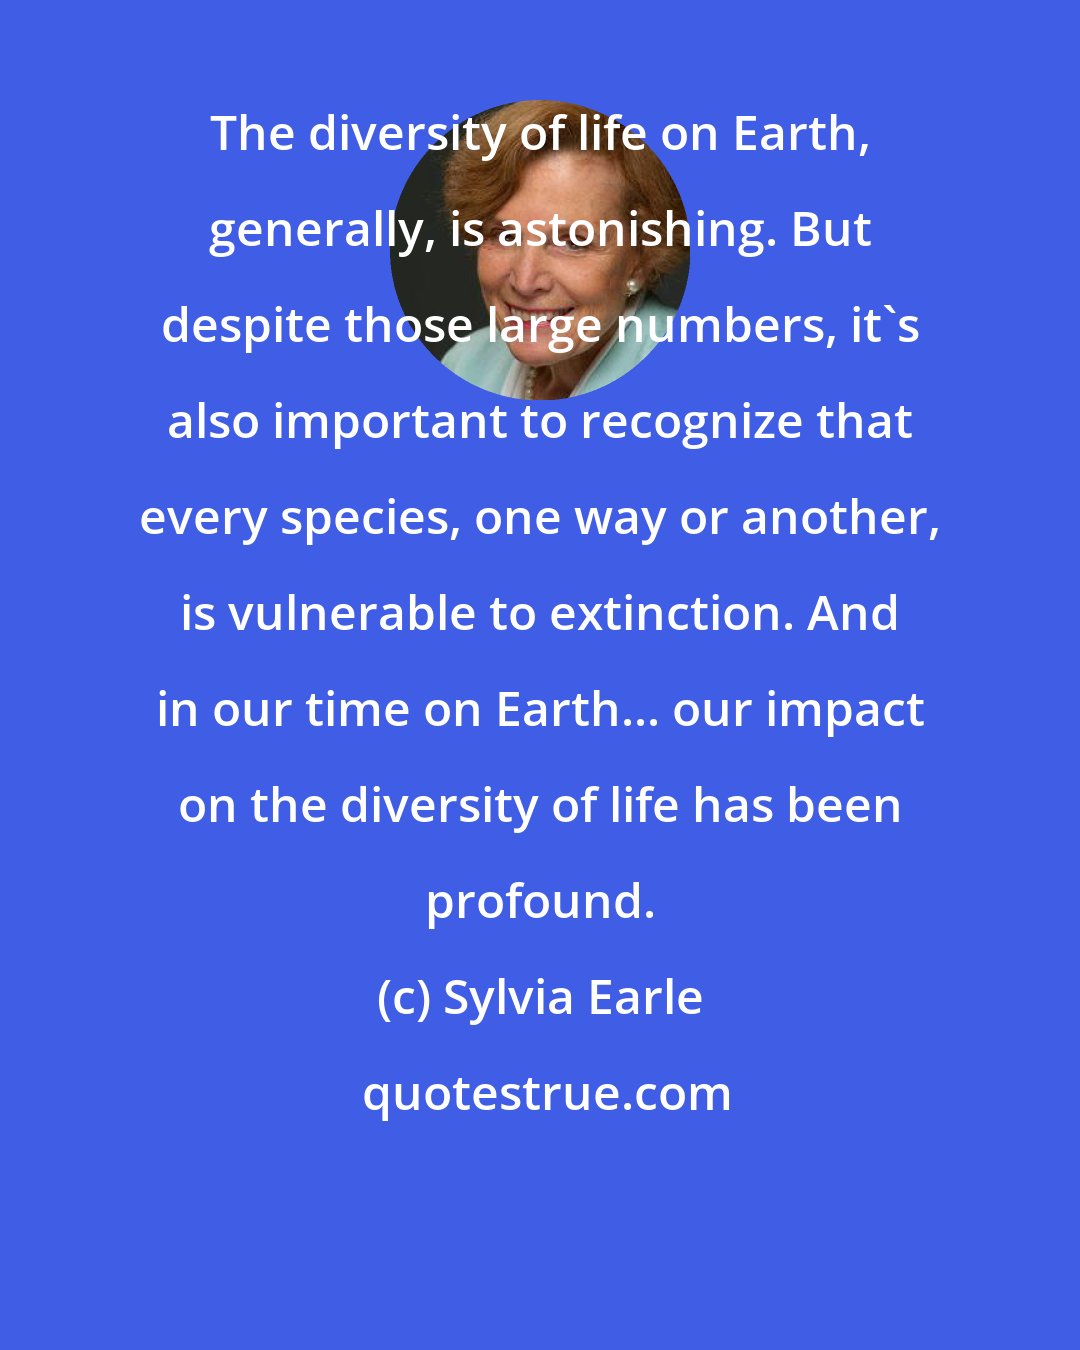 Sylvia Earle: The diversity of life on Earth, generally, is astonishing. But despite those large numbers, it's also important to recognize that every species, one way or another, is vulnerable to extinction. And in our time on Earth... our impact on the diversity of life has been profound.